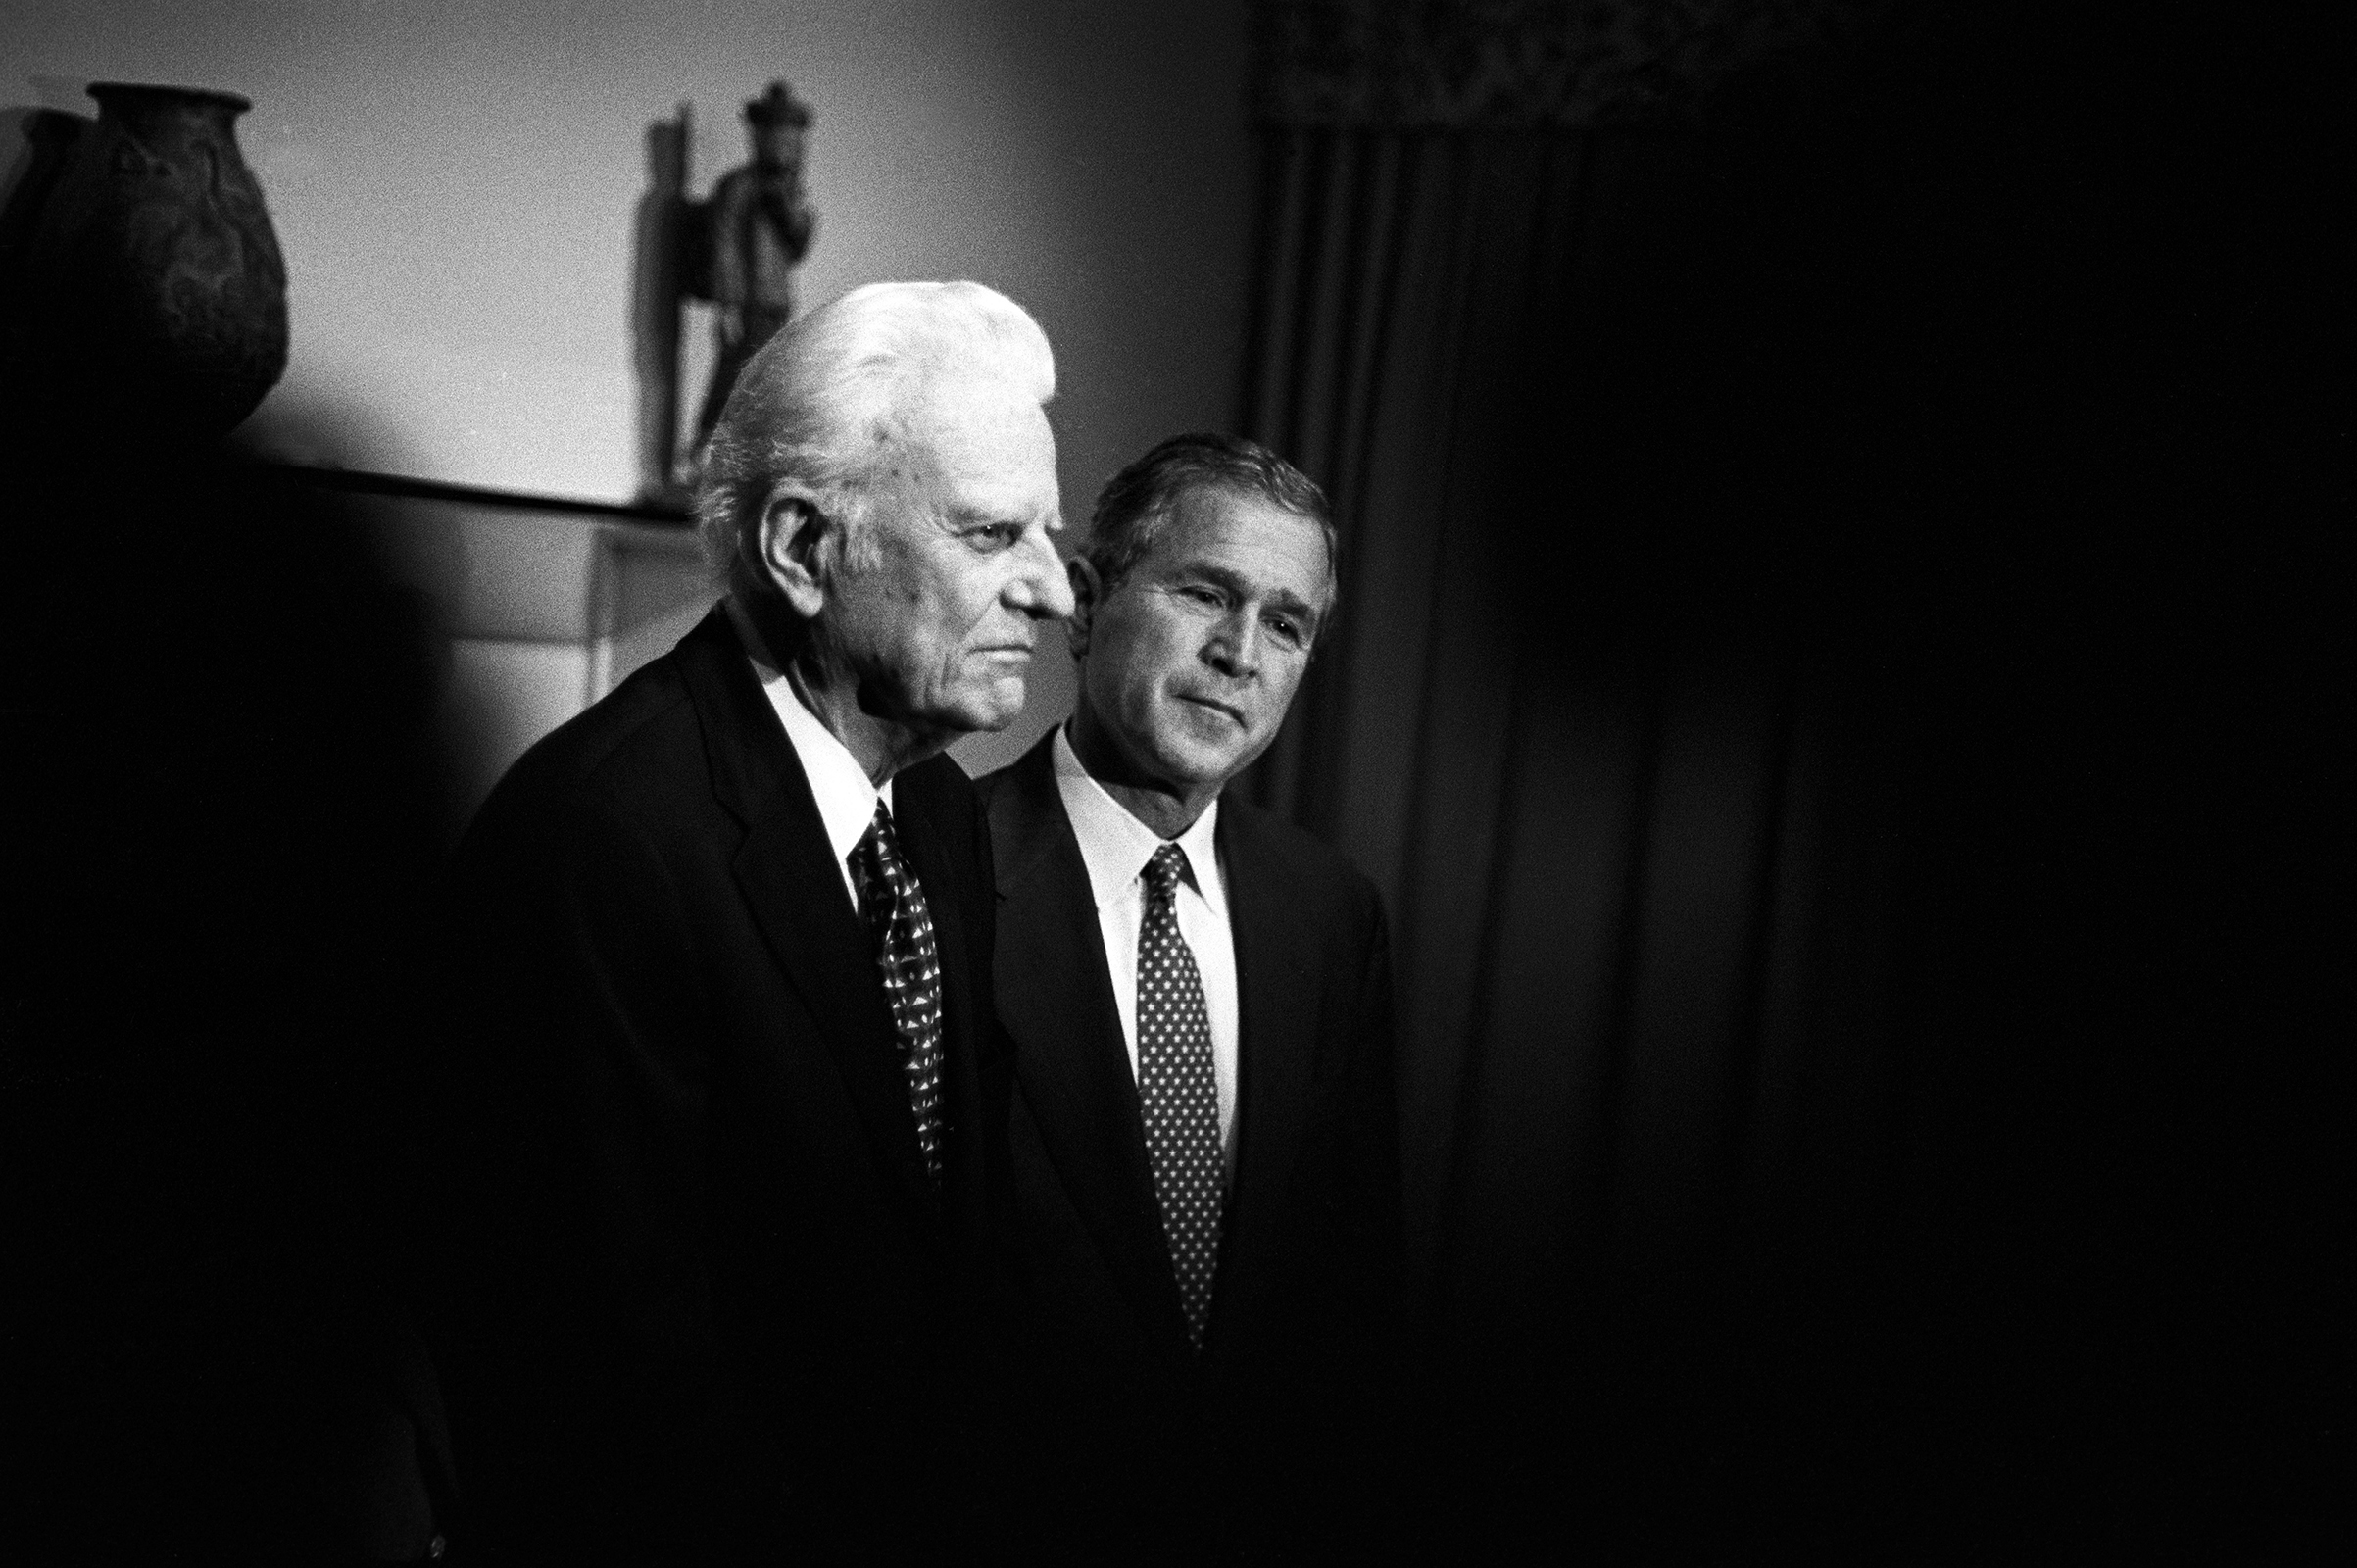 Billy Graham meets privately with Texas Governor and Republican presidential candidate George W. Bush in Jacksonville, Fla., on Nov. 5, 2000. Graham gave his tacit endorsement to Bush's run for the presidency after the two talked about faith and the future of the country. (Charles Ommanney—Getty Images)